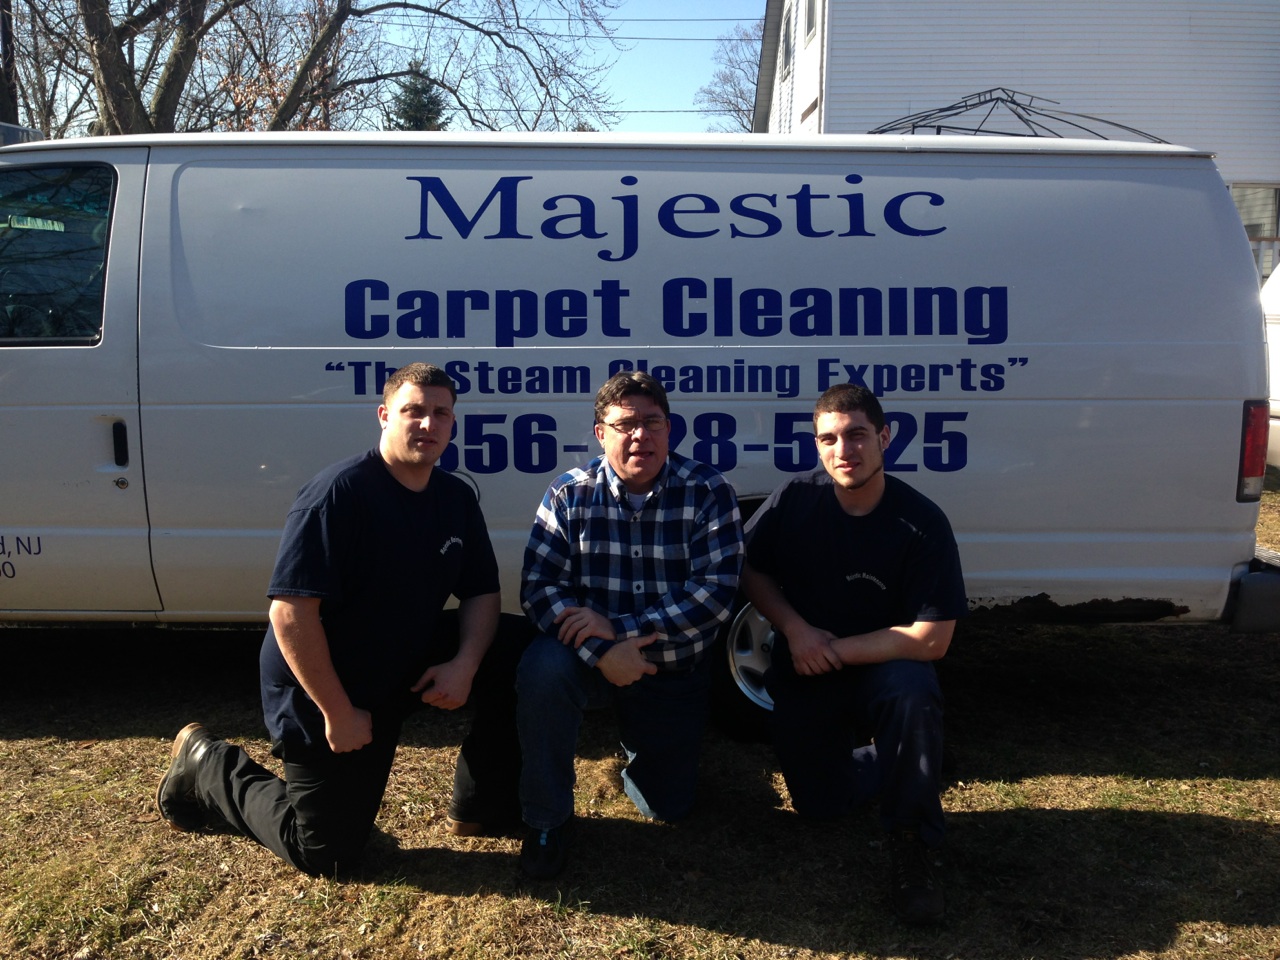 Majestic's Pet Stain and Odor Removal